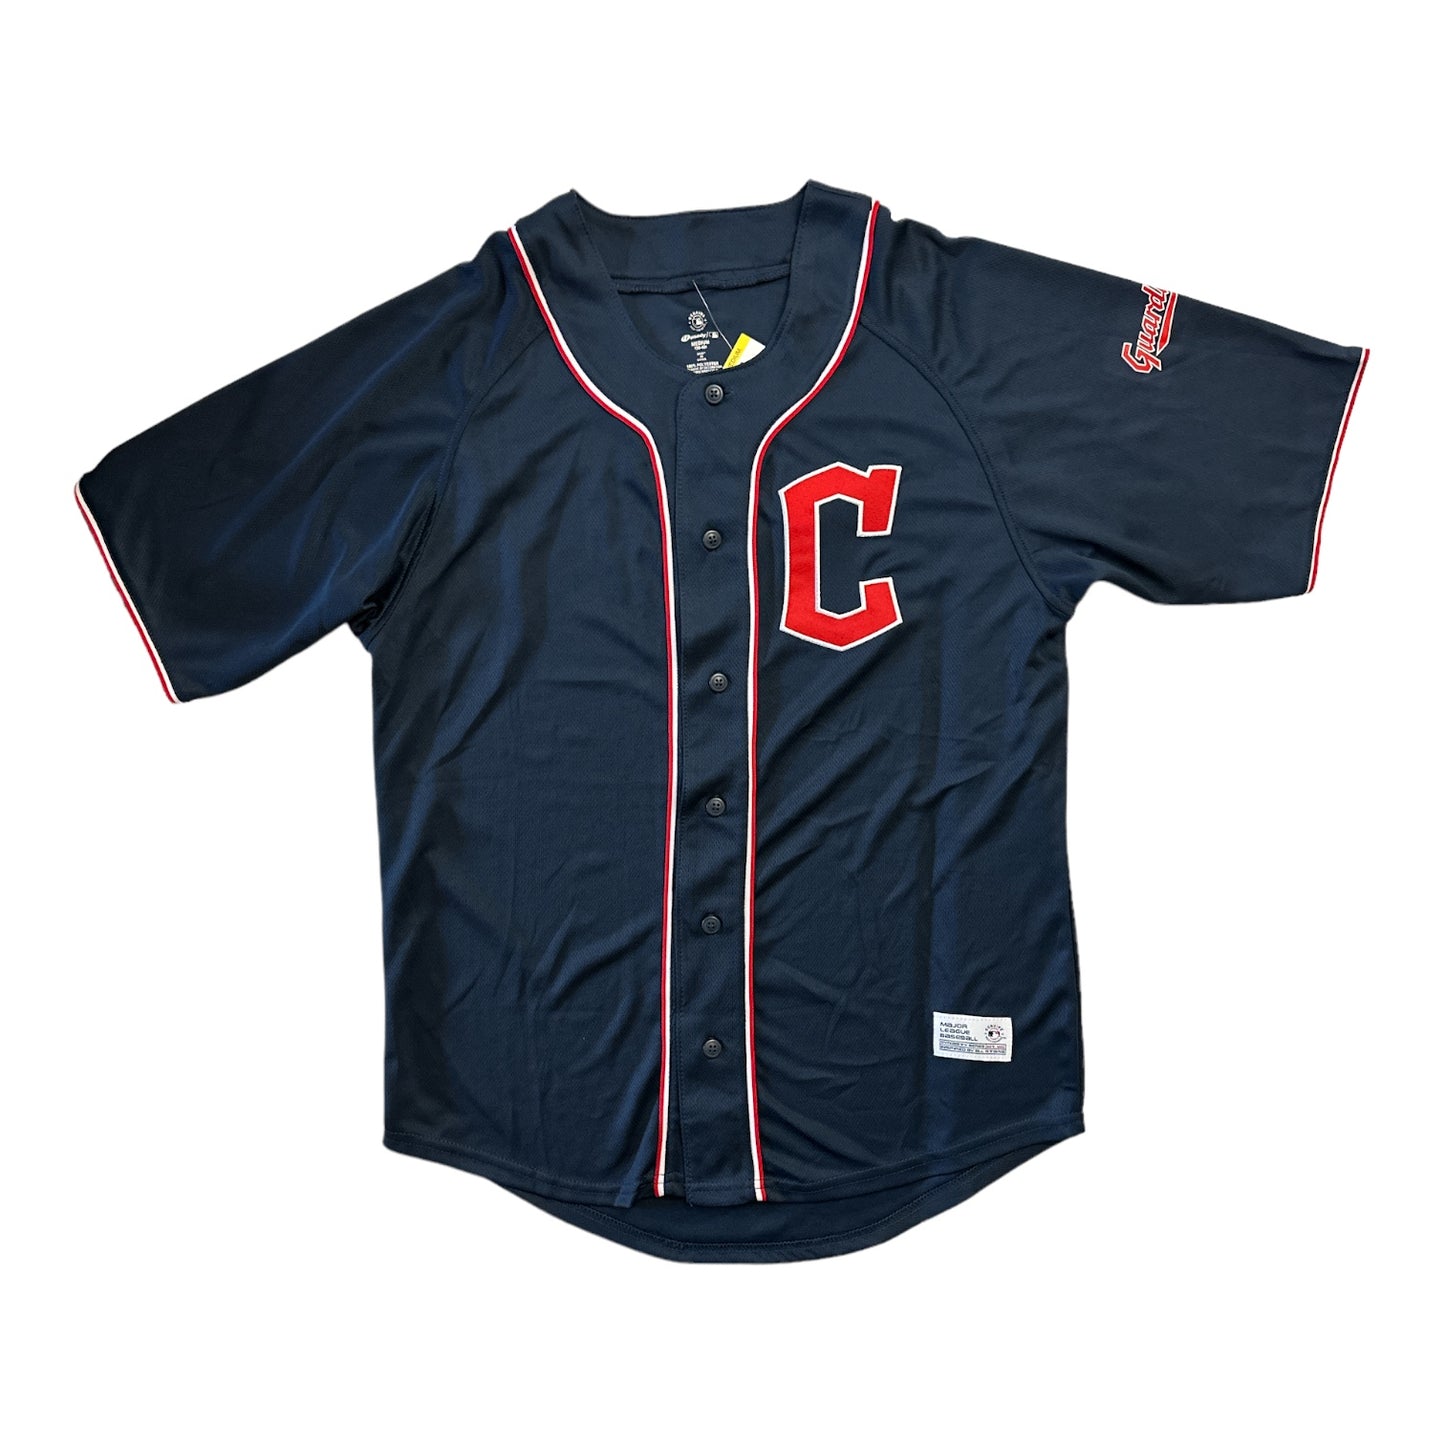 CLEVELAND GUARDIANS MLB TACKLE TWILL BUTTON FRONT JERSEY BY